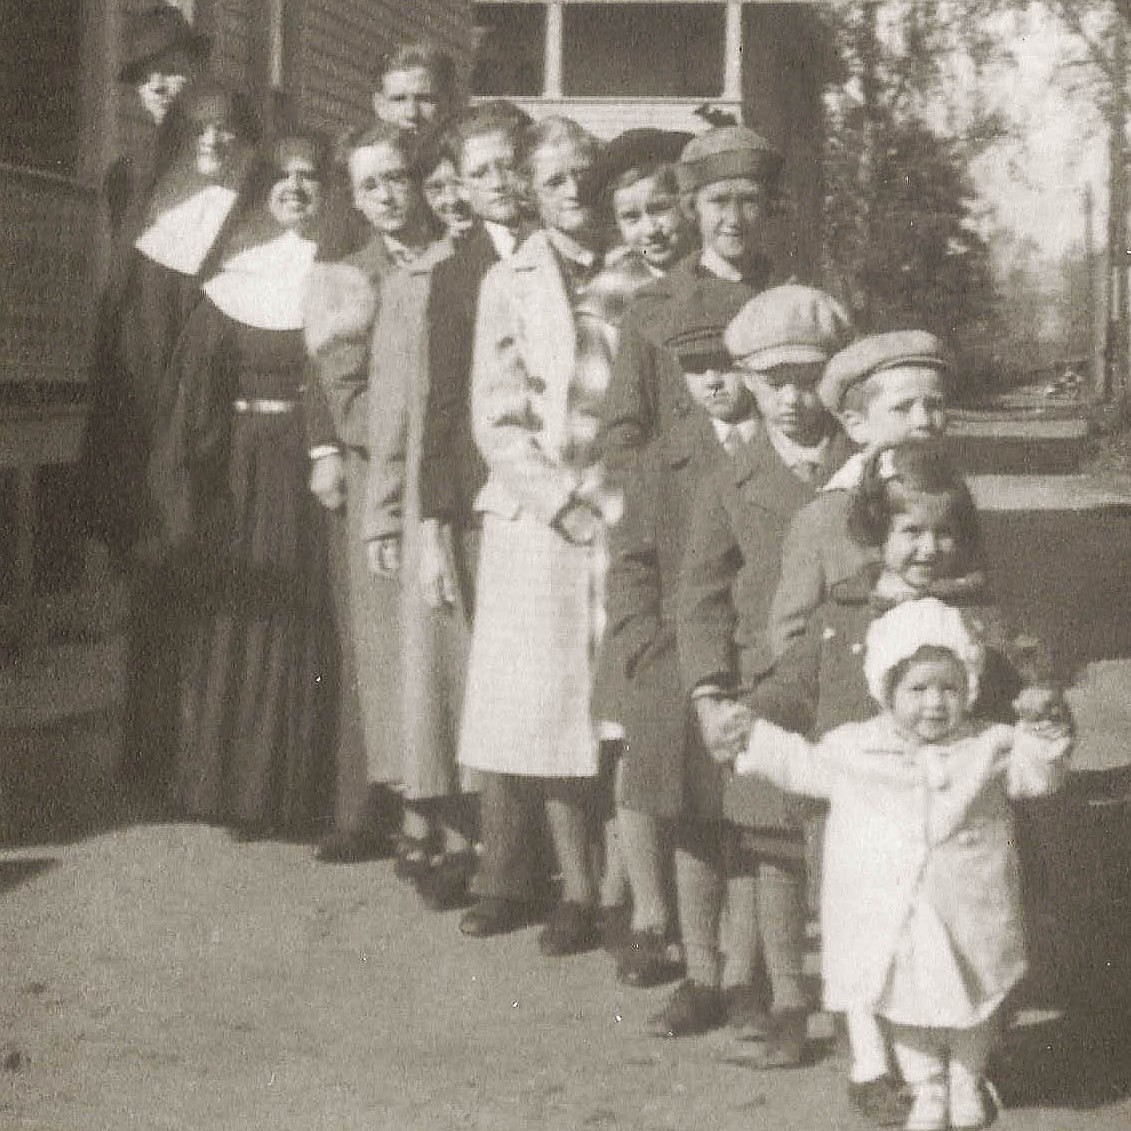 The Graber children lineup. All 15 kids posed for this photo in 1938 when Sister Kay (in front) was one and a half years old.